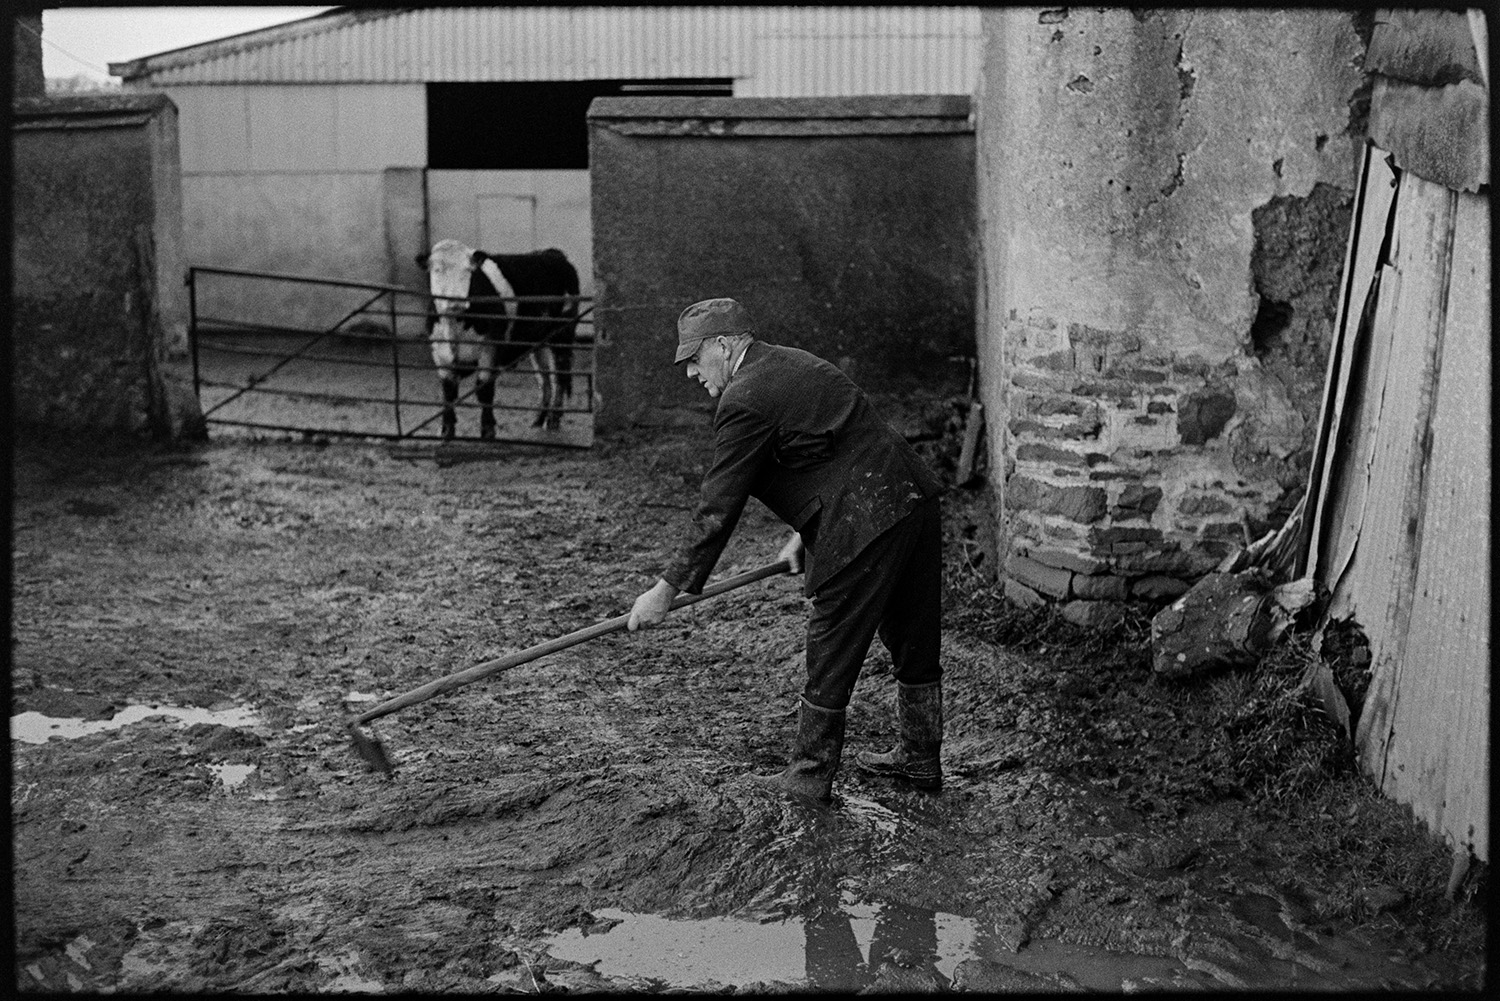 Farmer mucking out yard with scraper and broom. 
[John Ward mucking out a farmyard with a scraper at Parsonage Farm in Iddesleigh. A cow is watching him over a gate and a barn is visible in the background.]